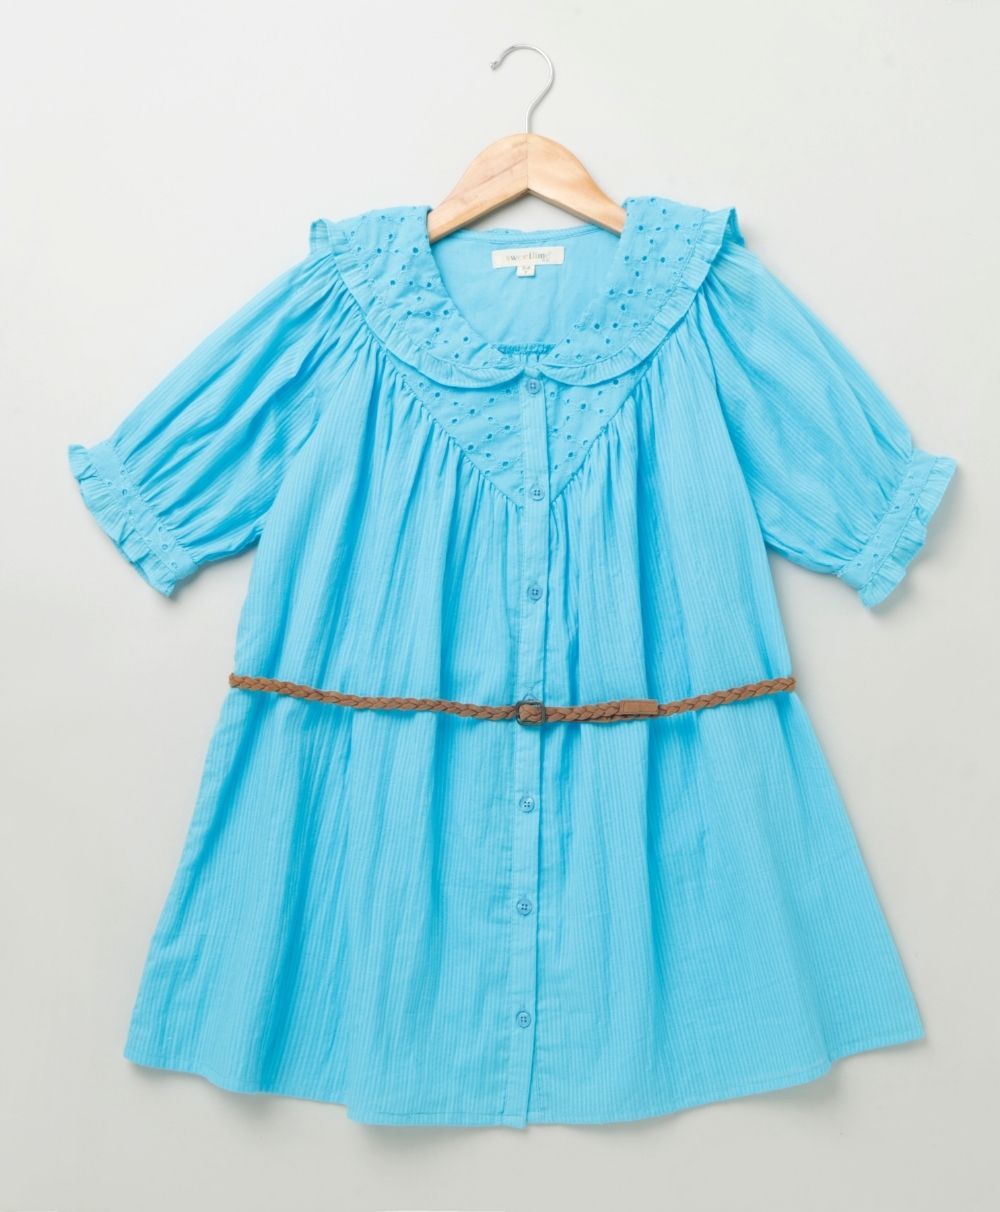 Sweetlime by AS Peter Pan Collar Neck Short Sleeves Tank Top With Belt Top - Turquoise - SLG-TANKTOP-239-3-4Years